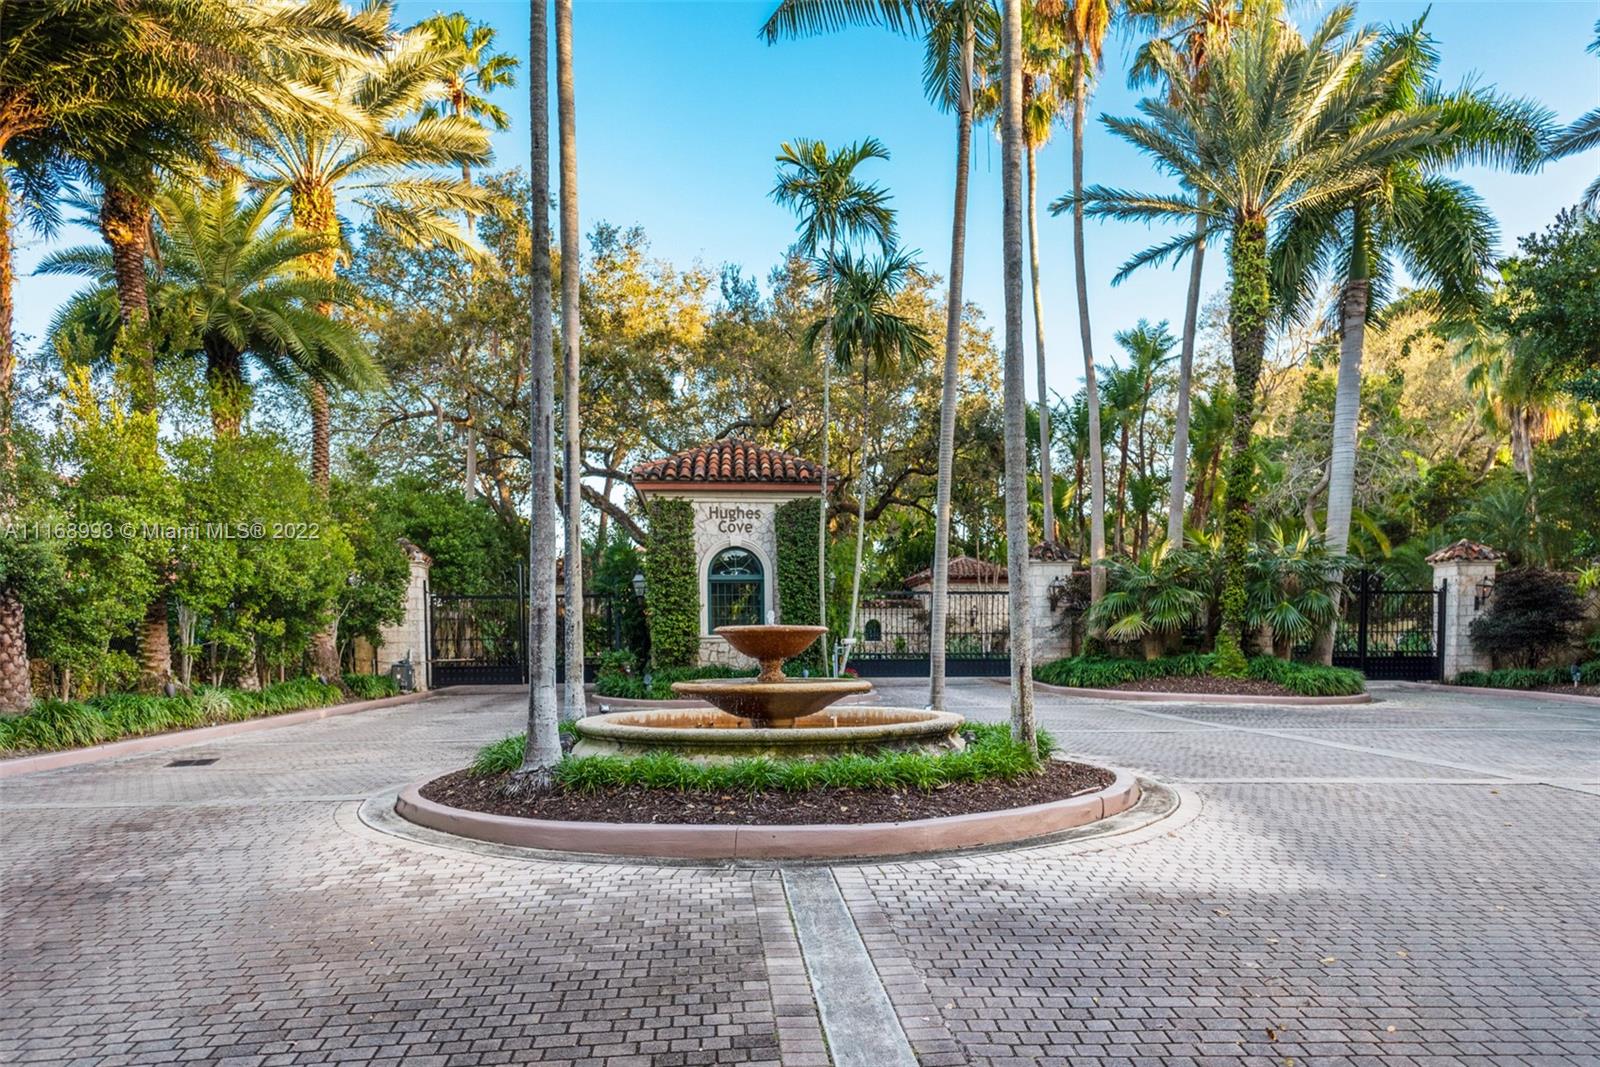 Tucked inside the prestigious, private & gated enclave of Hughes Cove, sits this stunning estate, filled w/ natural light, & boasting high ceilings throughout & gorgeous views of the waterfront park & bay across the street! Offering seclusion & elegance w/ room for everyone, this 9,862 sqft, 7 bedroom, 10 bathroom home has a terrific layout for families w/ 5BD/5BA on the 2nd floor & a media room & laundry room! Enjoy expansive balconies, covered terraces, a 2 car garage + carport, summer kitchen, elevator, gourmet gas eat-in kitchen, heated pool, gym, library, his & hers primary baths, playrooms, & rooftop terrace! This exclusive Coconut Grove community w/ only 11 residences, is a short walk to the village & has a 24hr security guard, tennis court, & serene privacy.